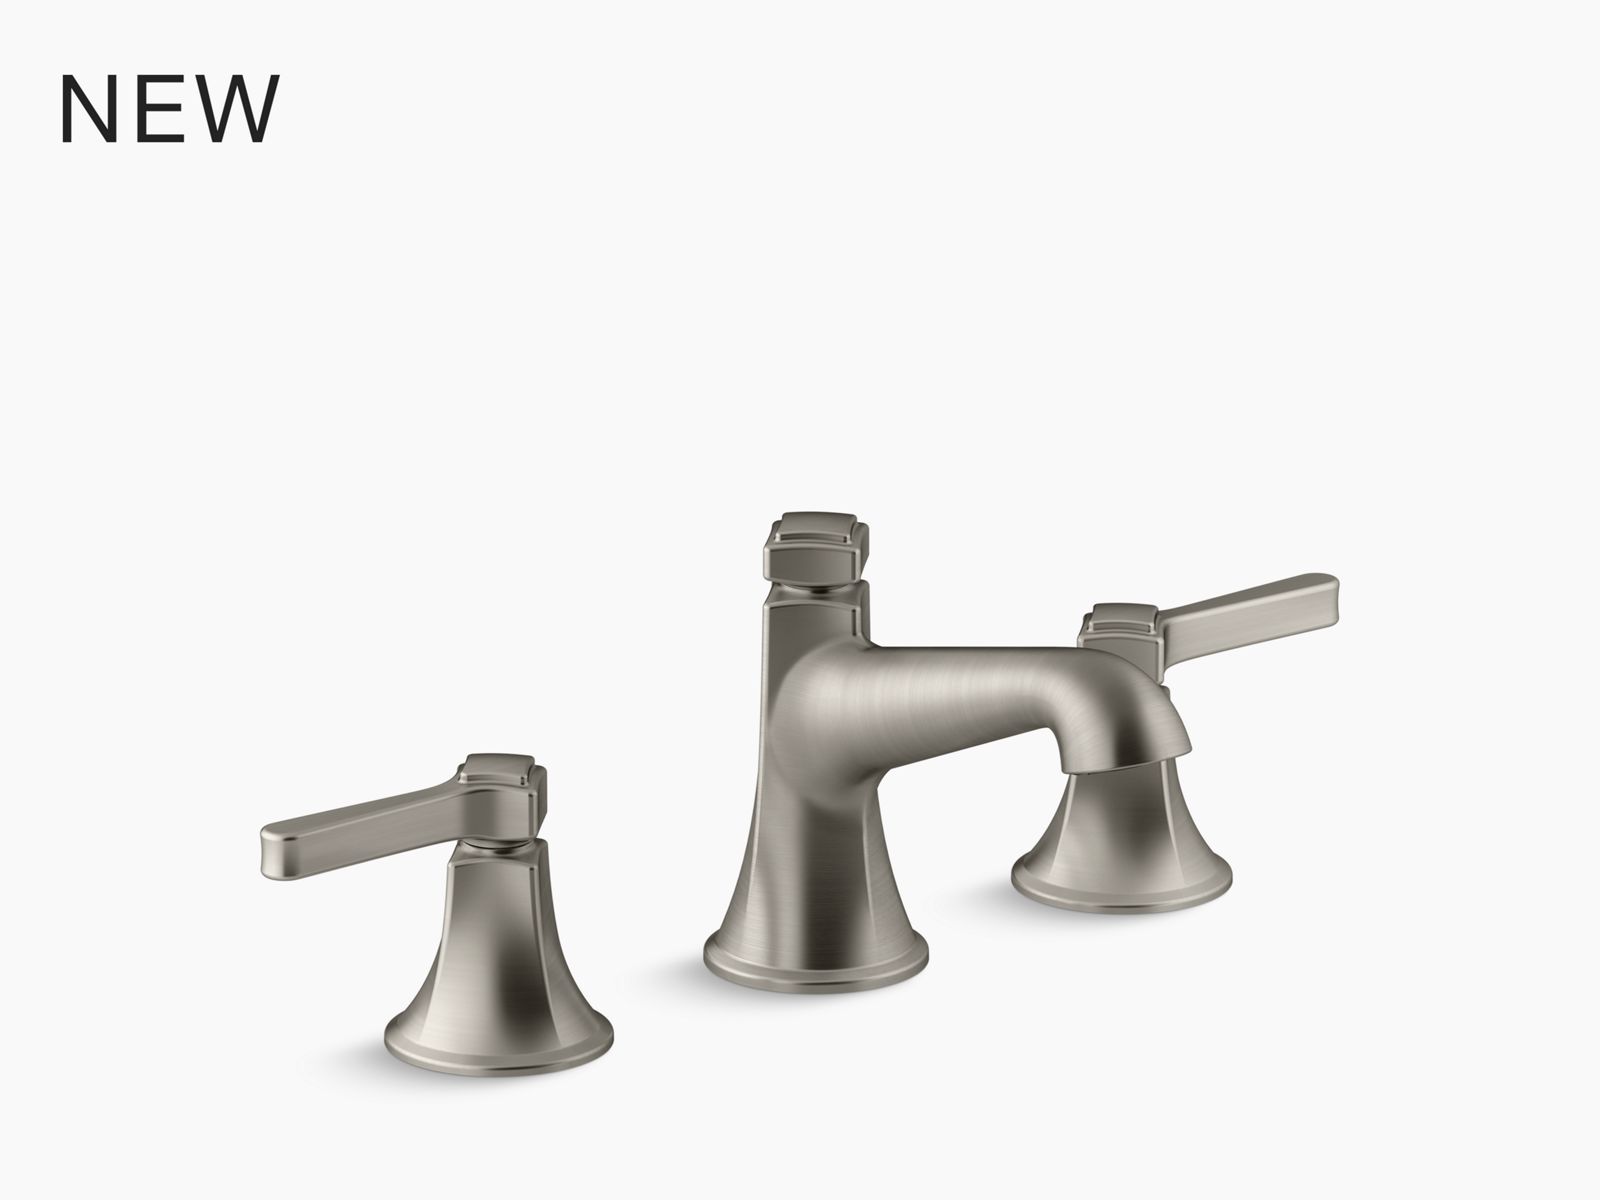 wall mounted country kitchen bridge faucet with handspray